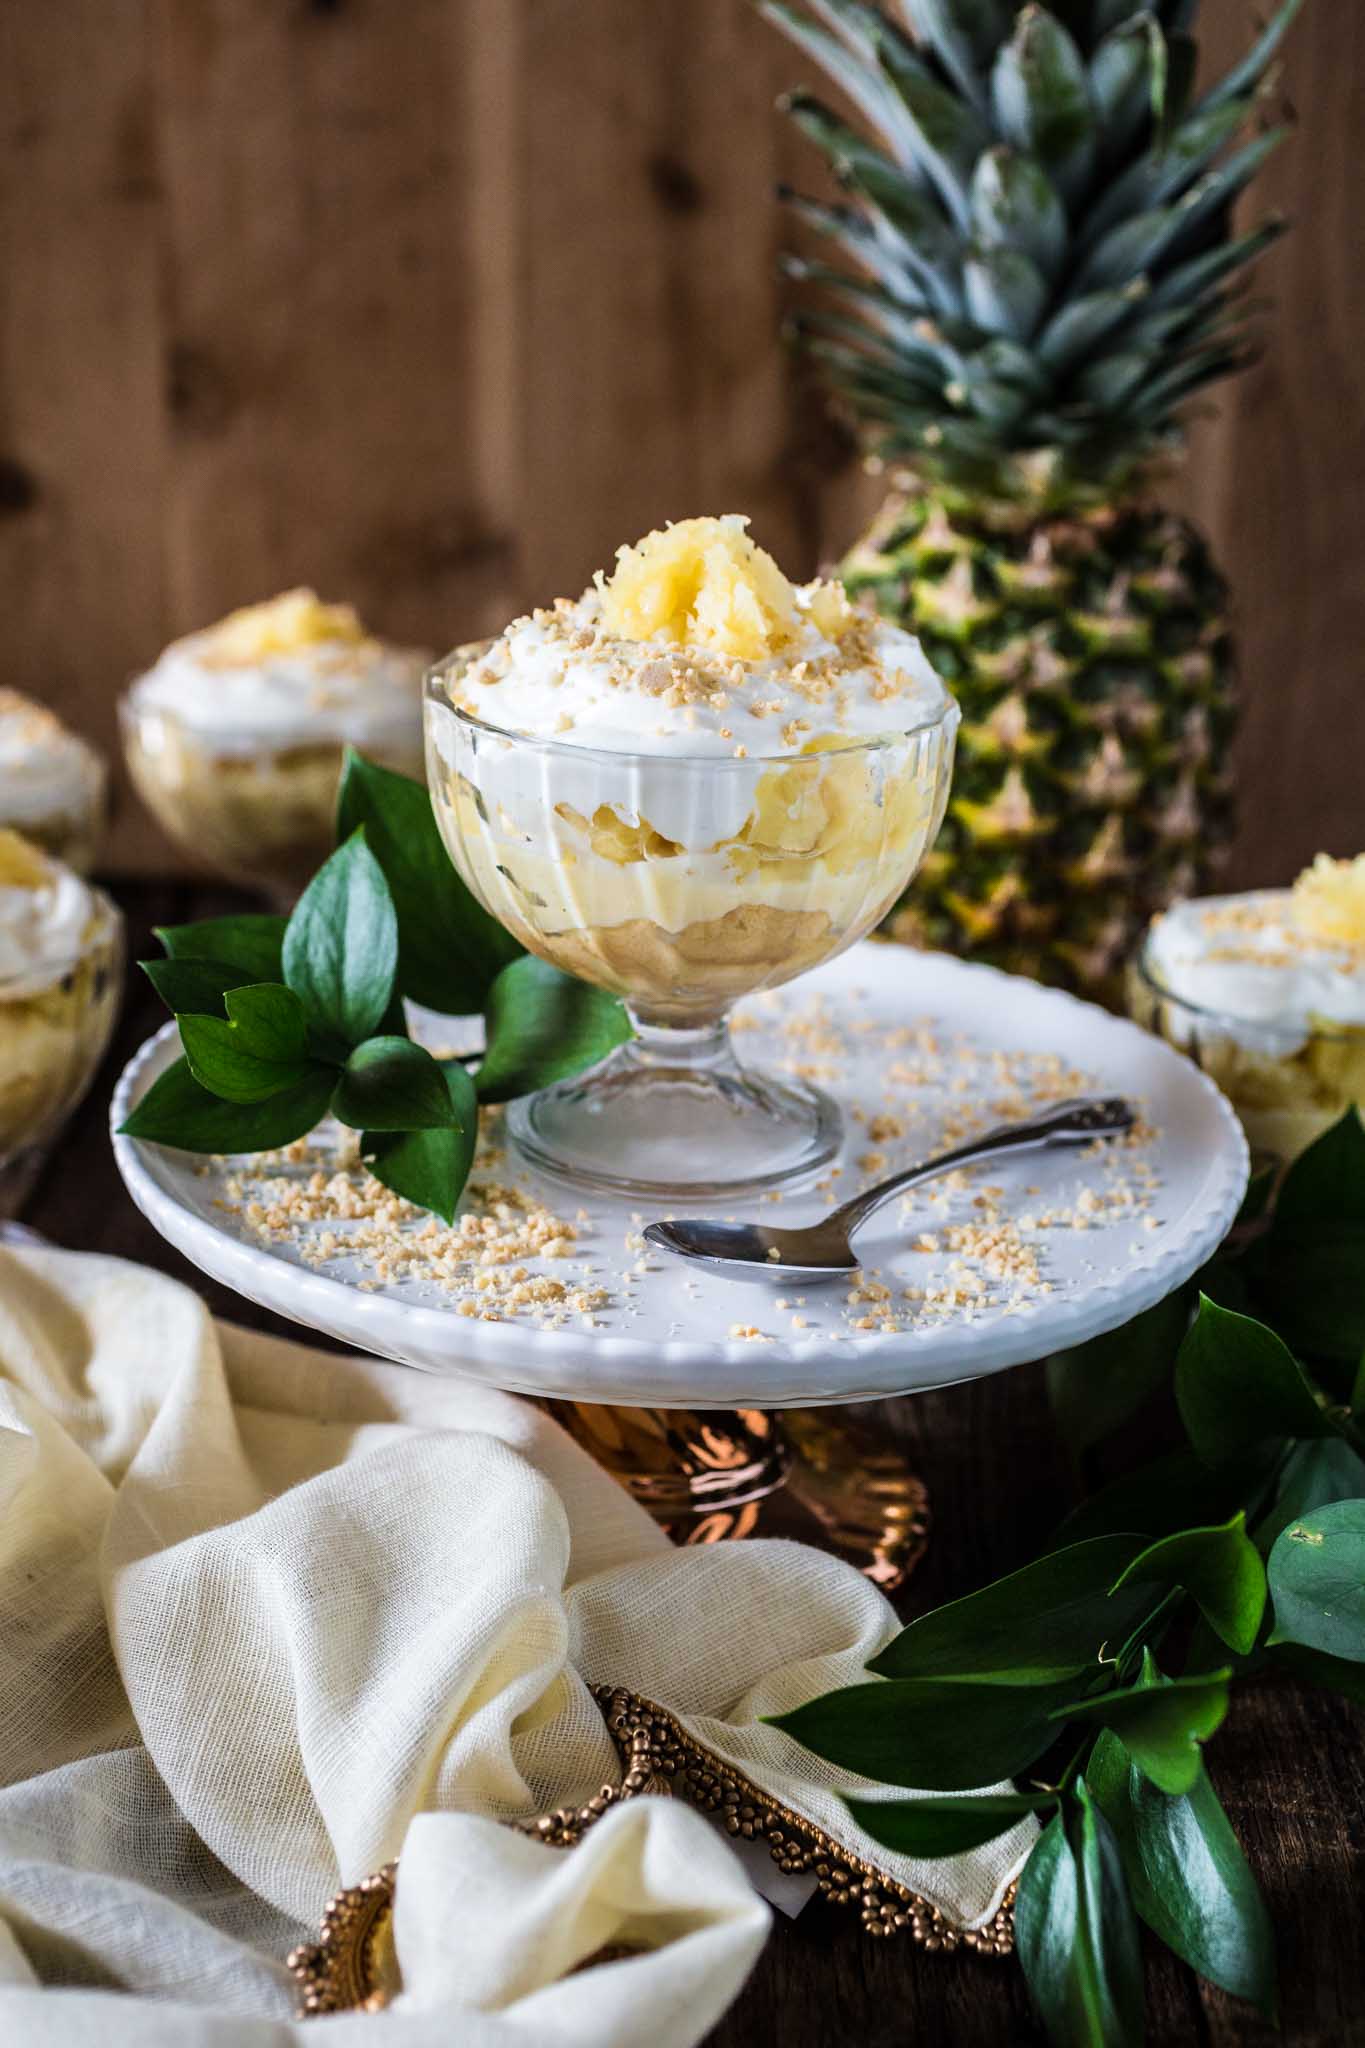 Brazilian Pineapple Dessert | www.oliviascuisine.com | Easy, delicious and tropical. What could be better than that? And don't worry. You get to make this all year round, since it's made with canned pineapples!